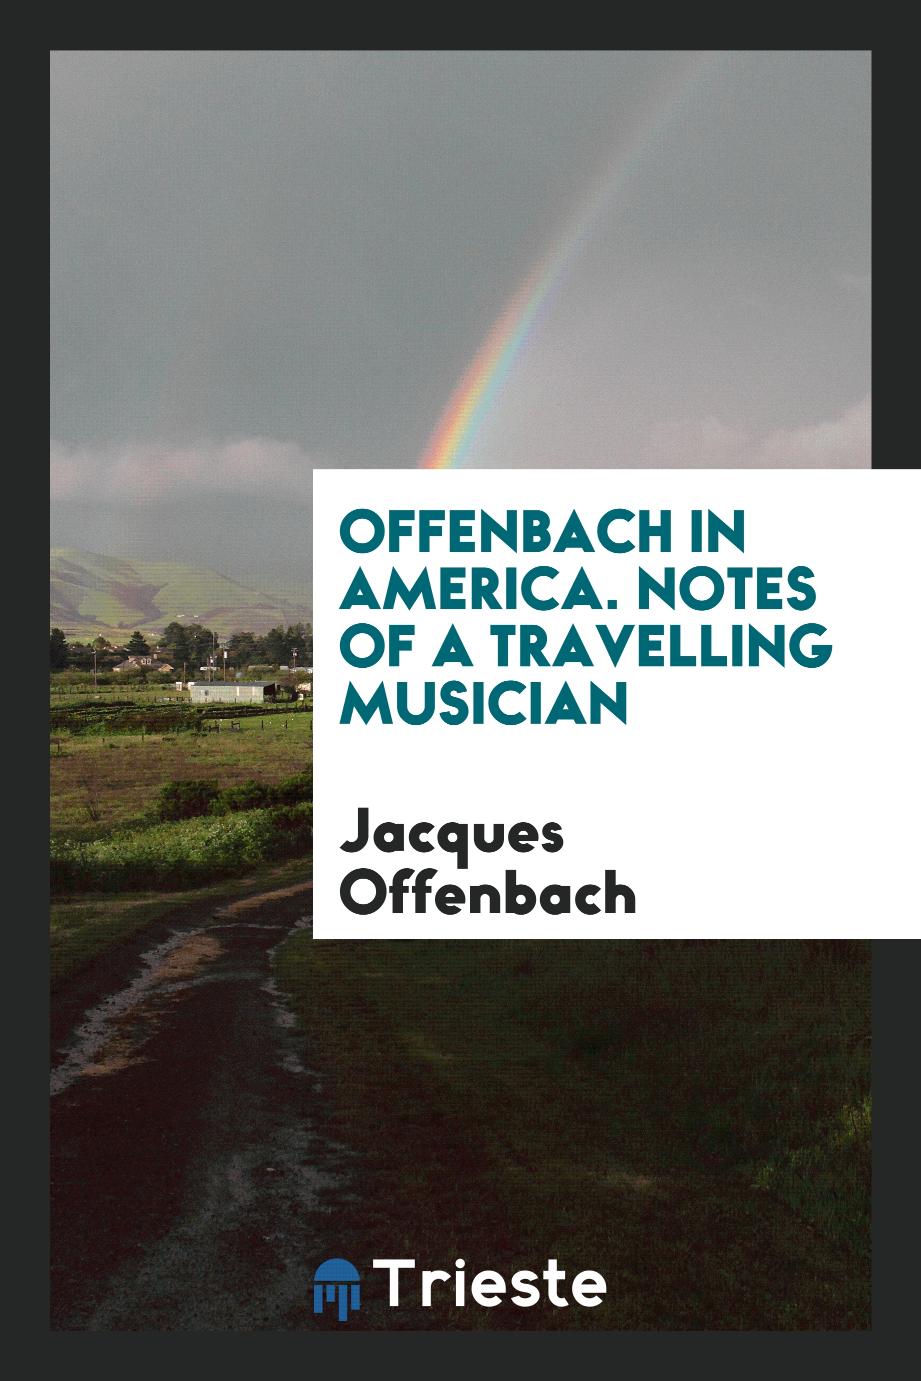 Offenbach in America. Notes of a travelling musician